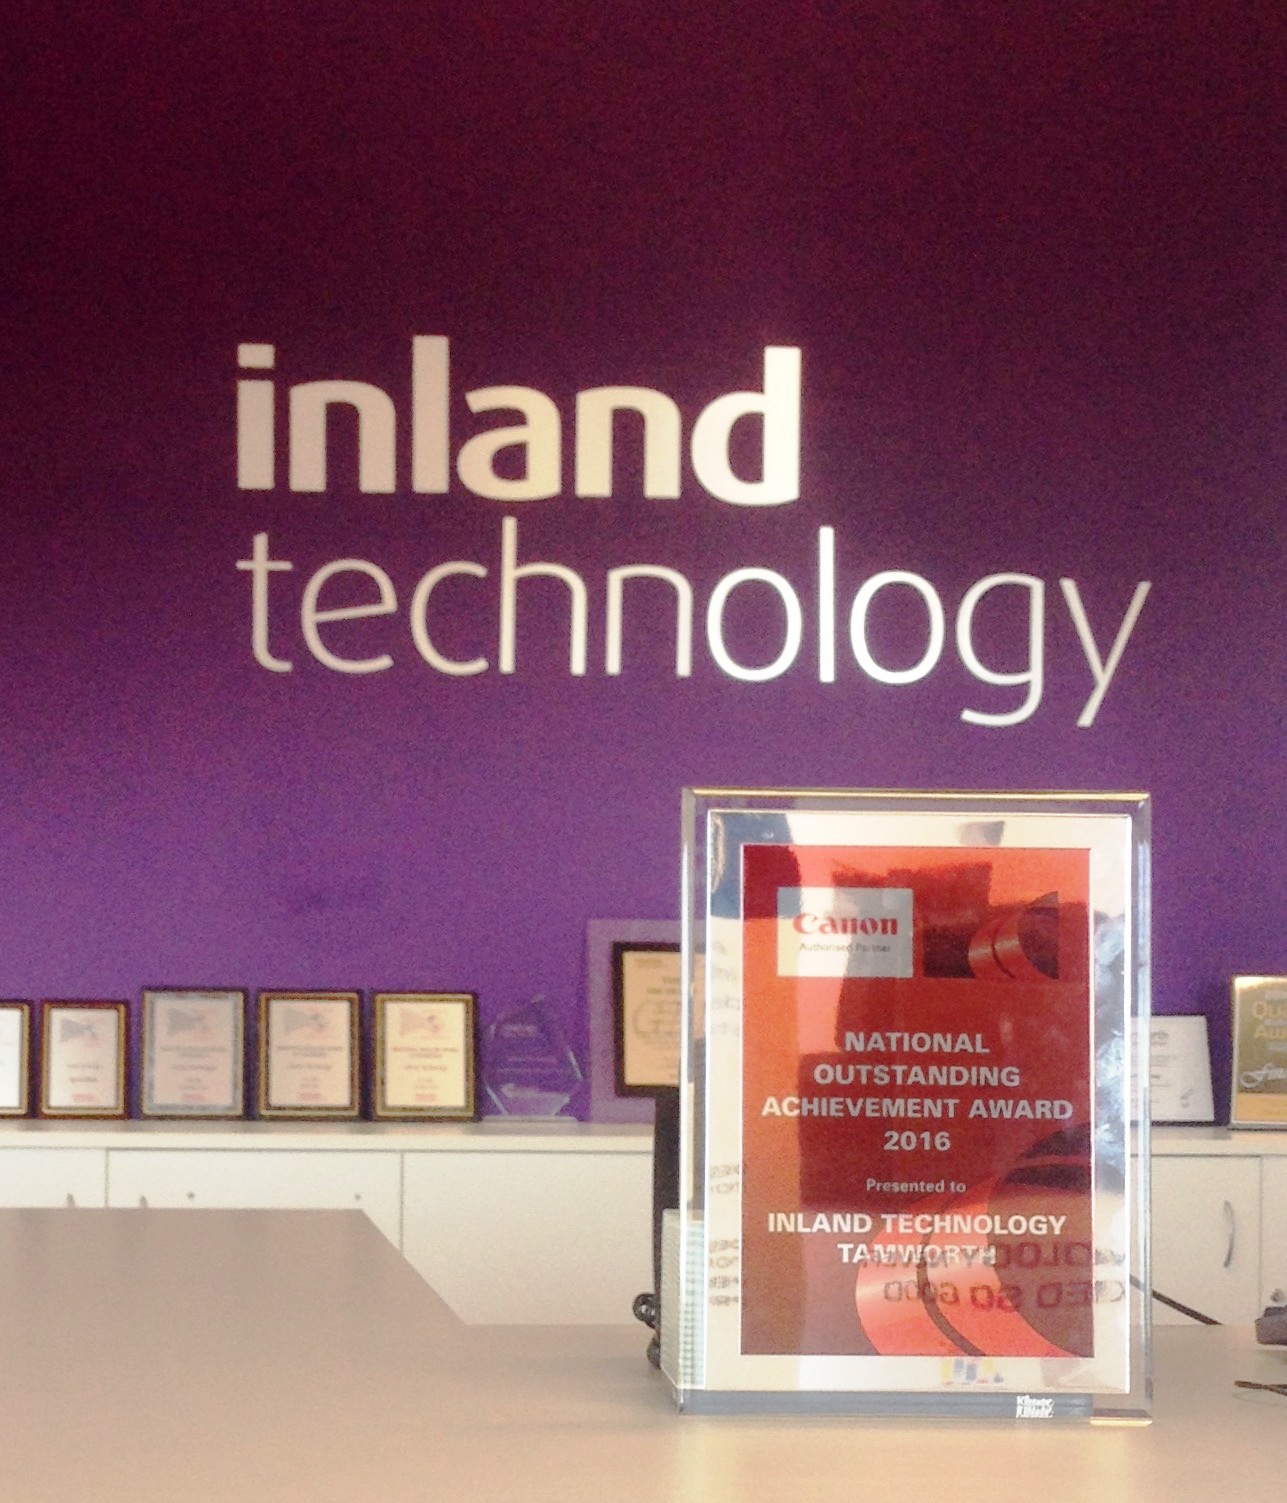 Inland Technology wins Canon's National Outstanding Achievement Award